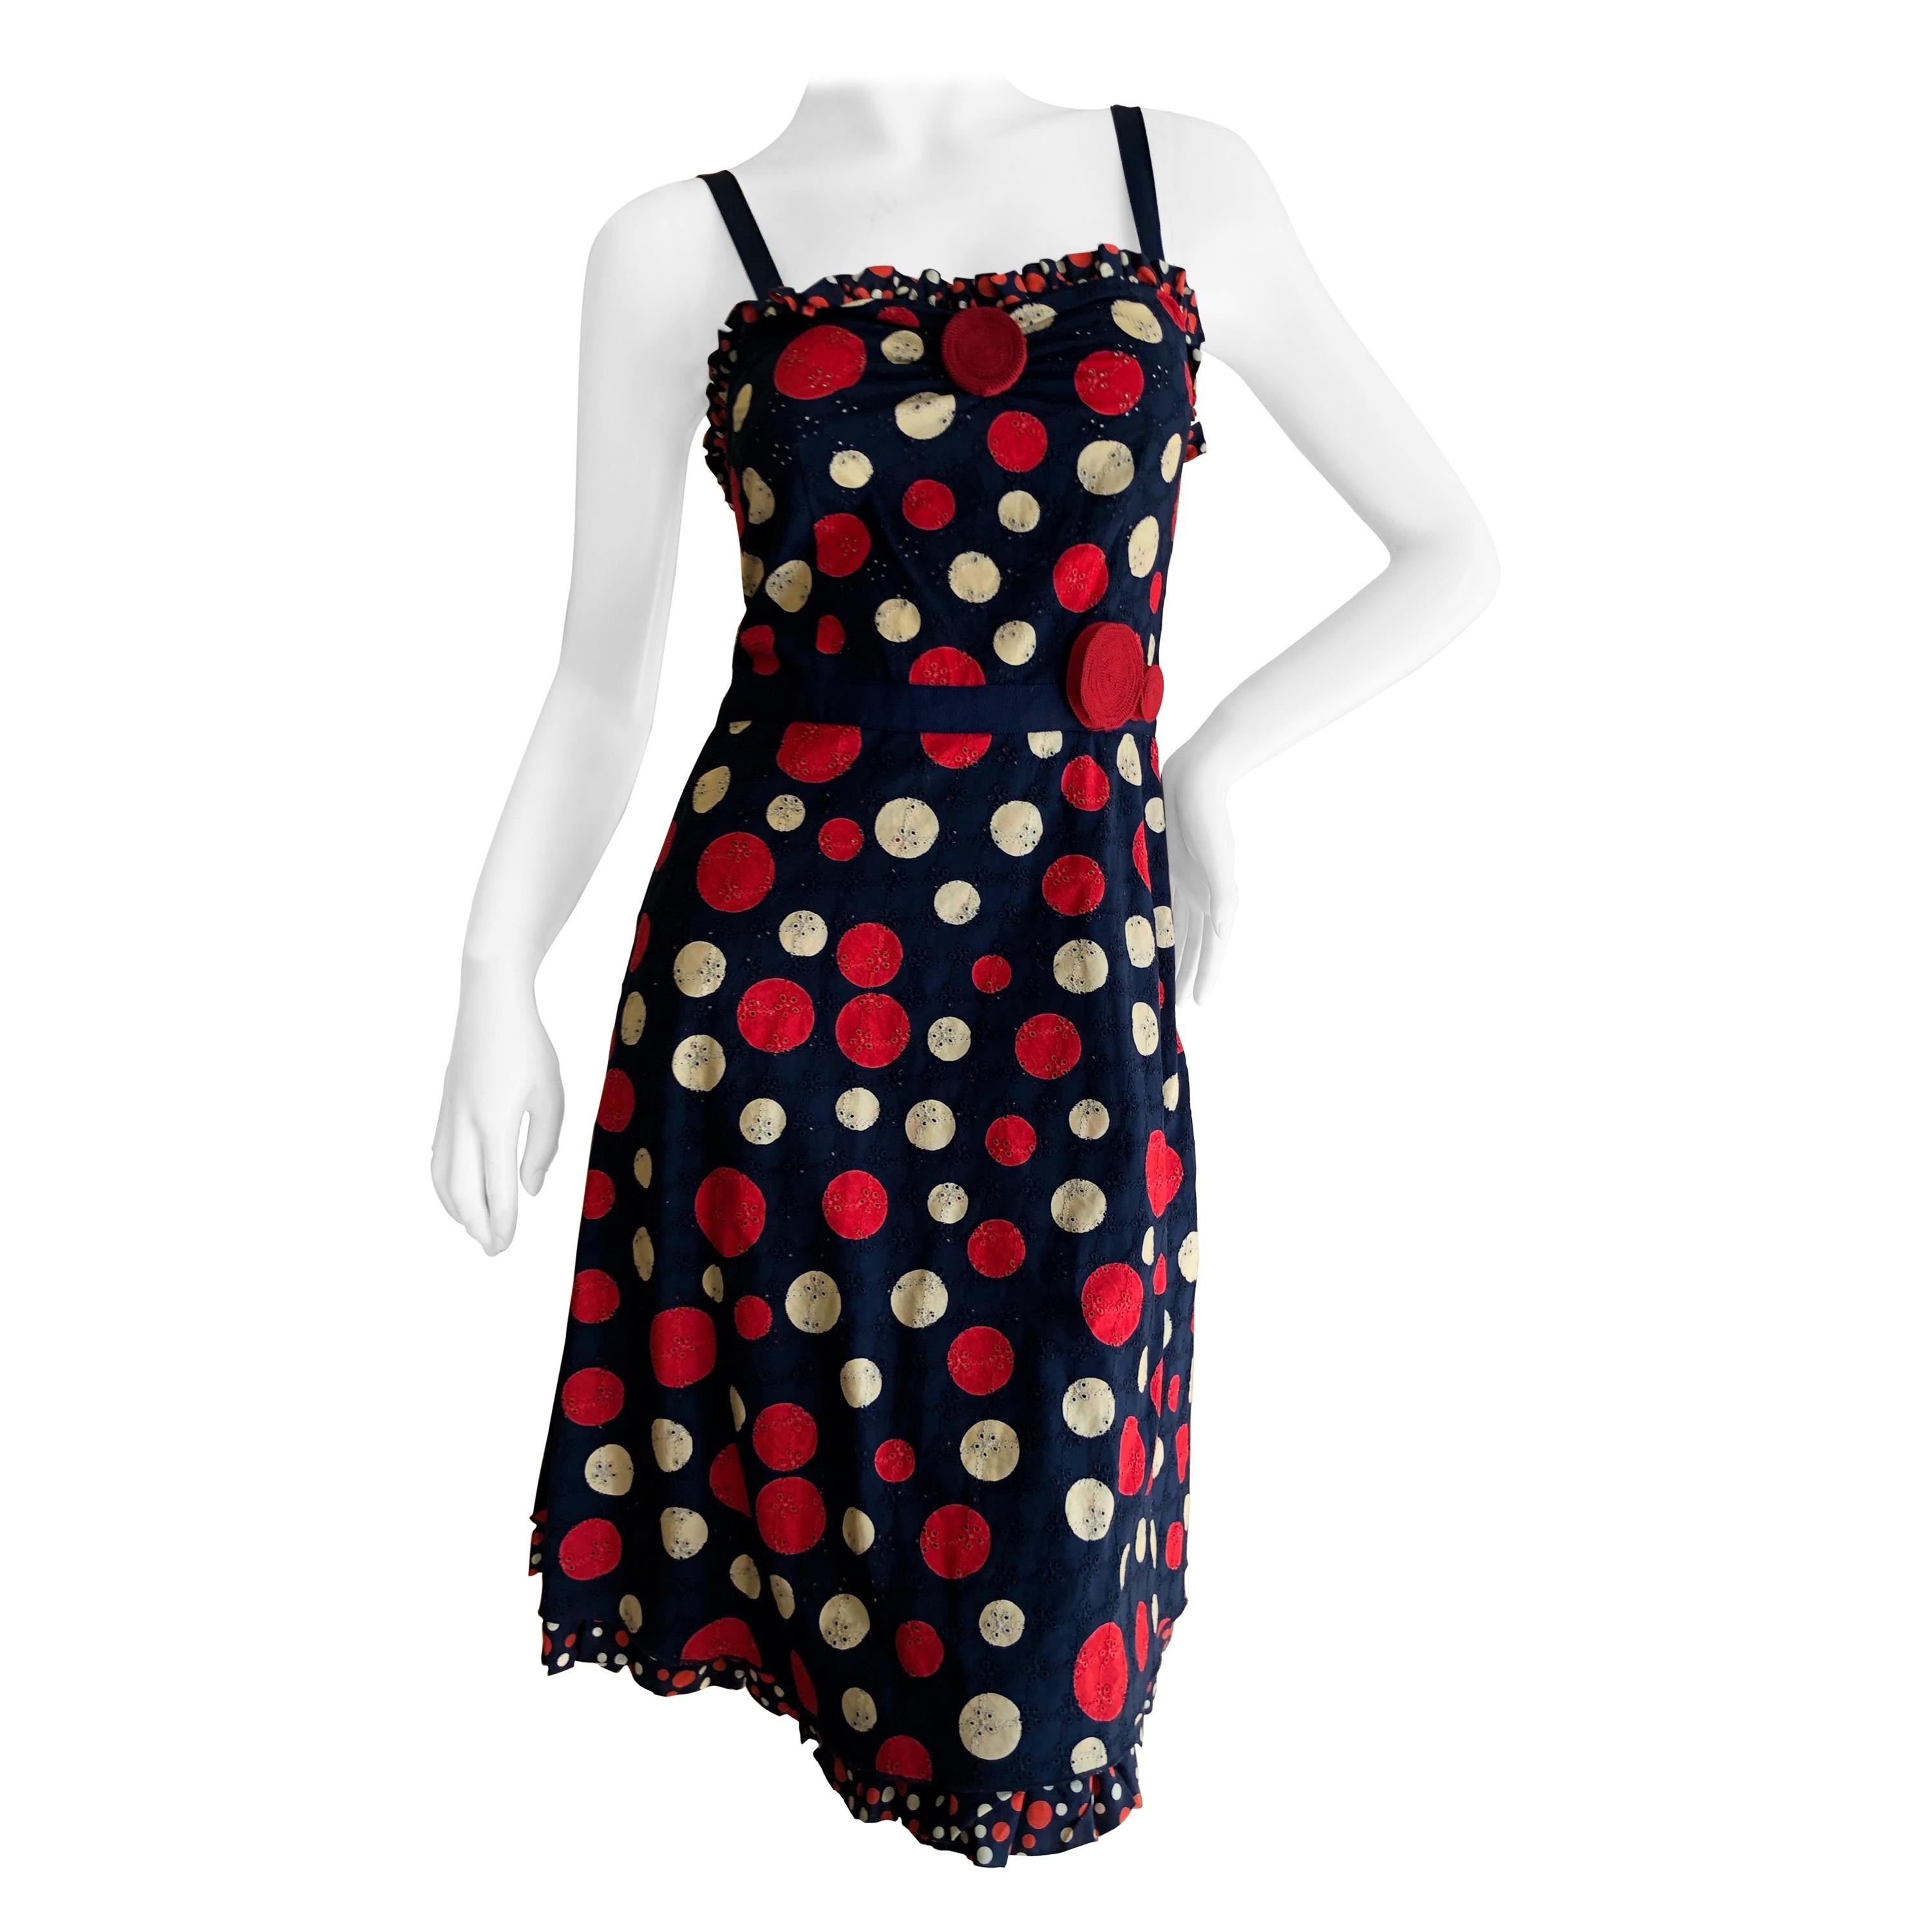 Moschino Cheap & Chic Vintage Polka Dot Dress in Navy Eyelet Cotton For Sale